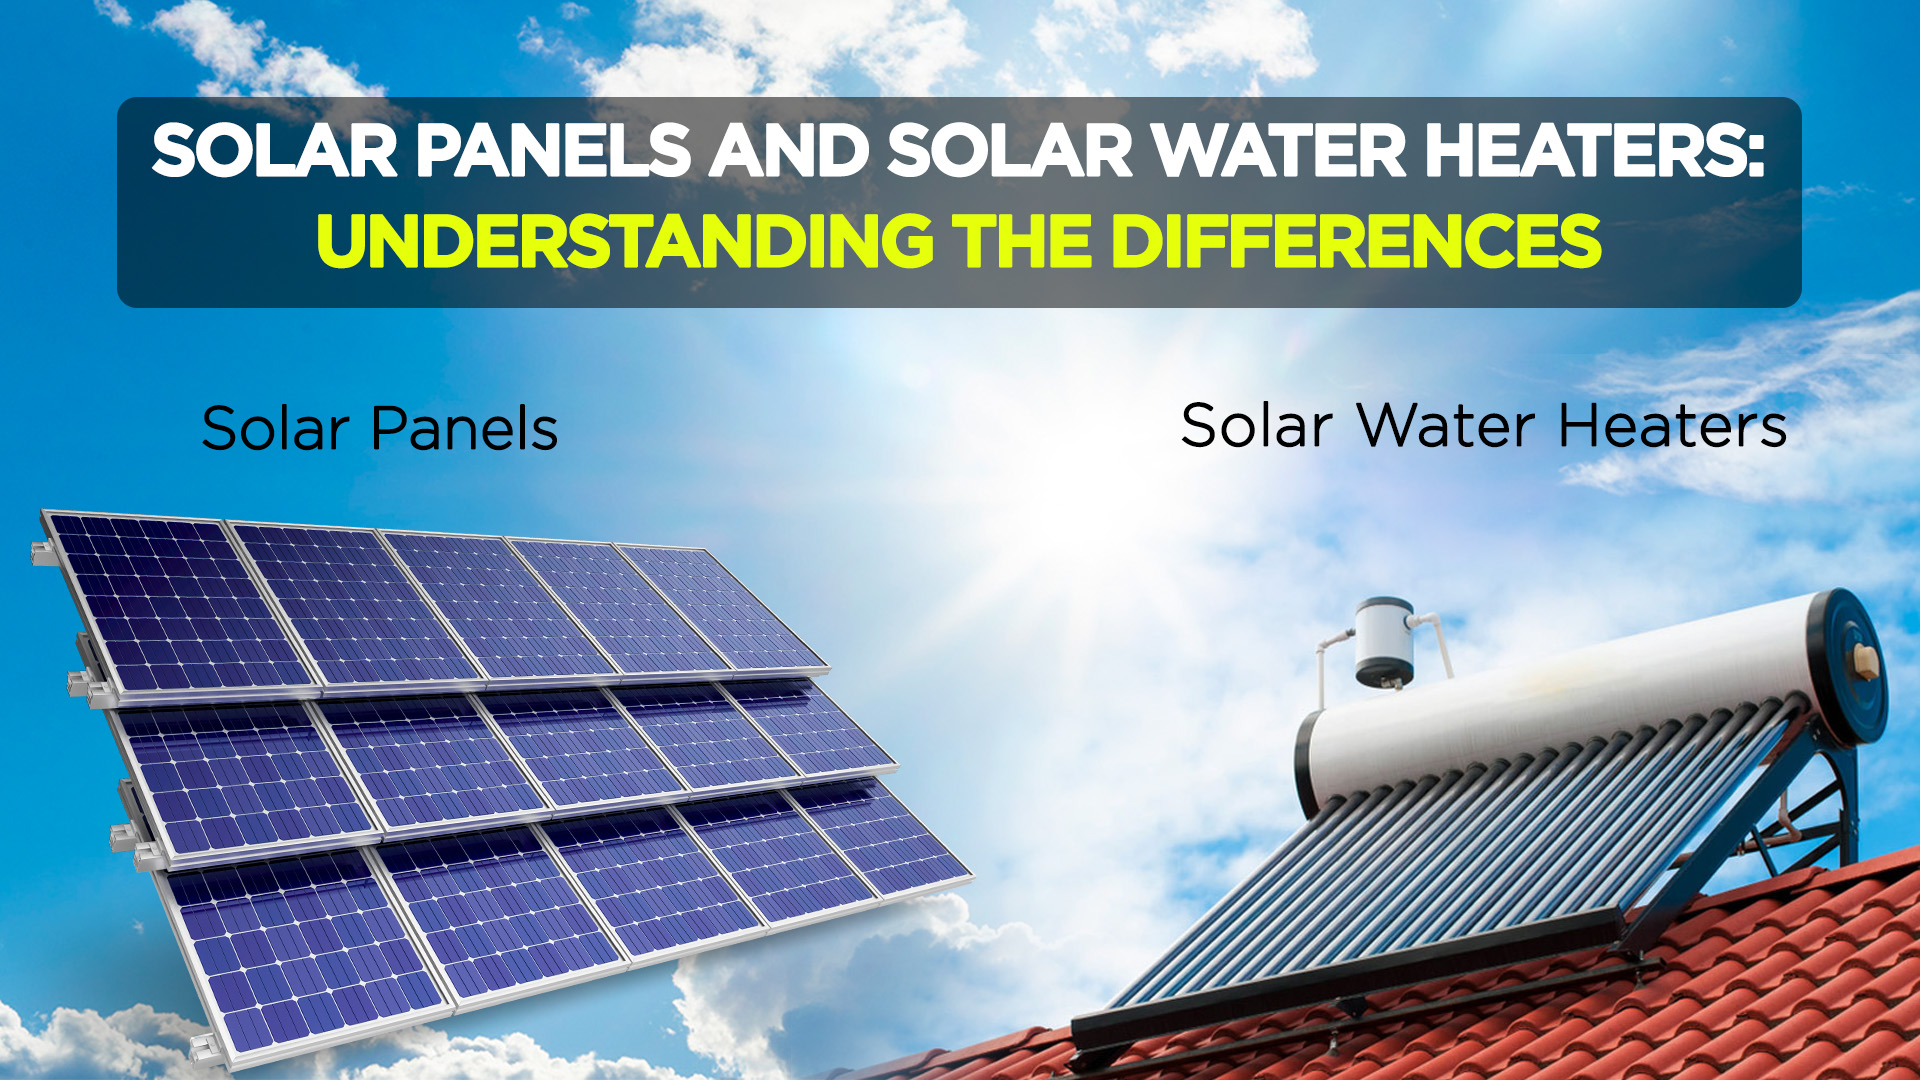 https://renergyinfo.com/solar-panels-and-solar-water-heaters-understanding-the-differences/